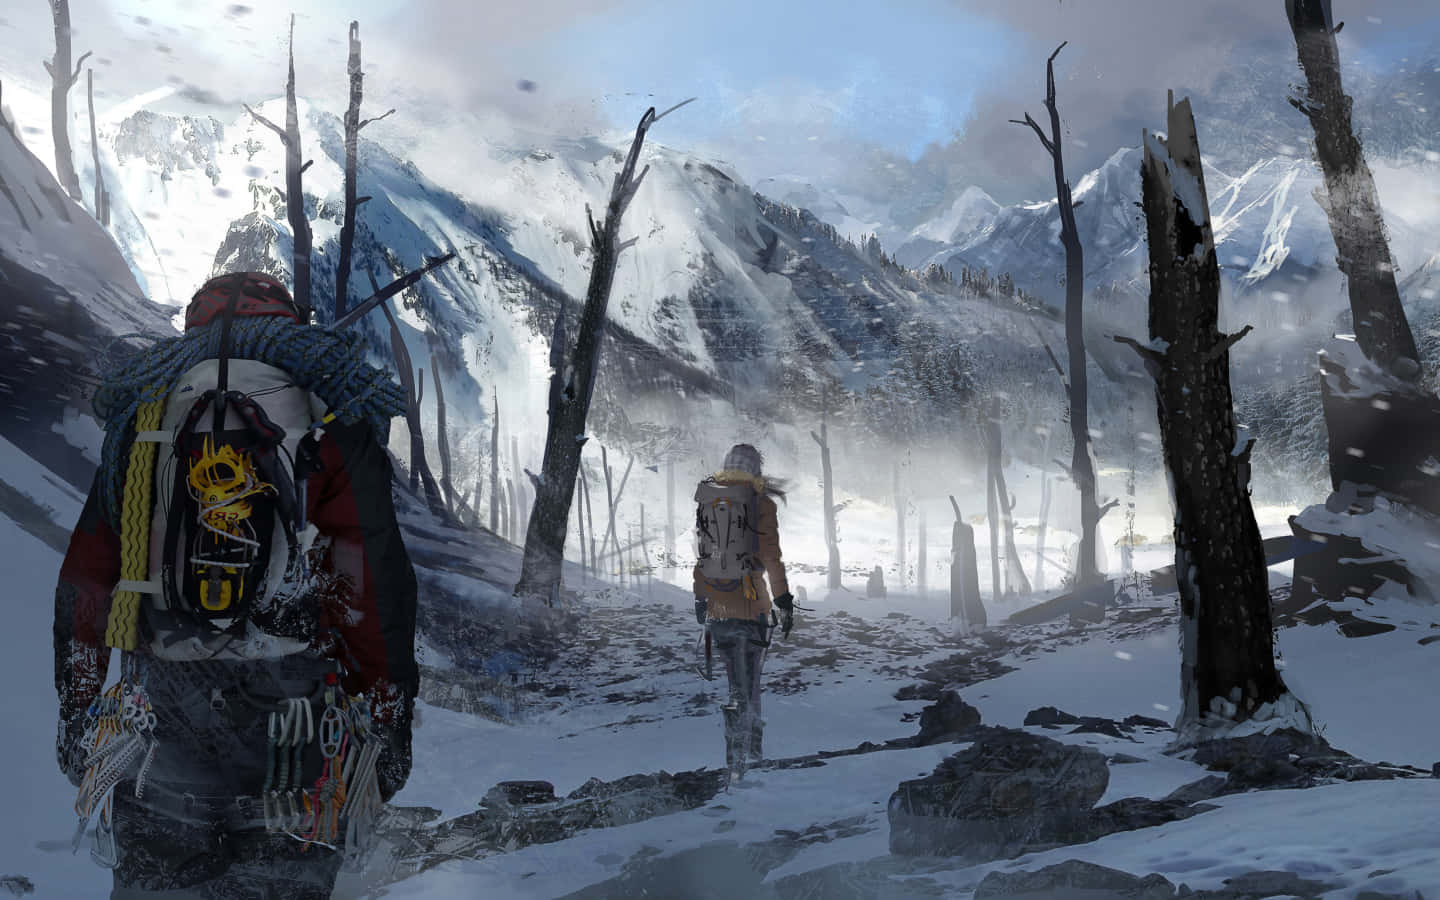 Lara Croft joins an expedition deep into the Siberian wilderness in Rise of the Tomb Raider.